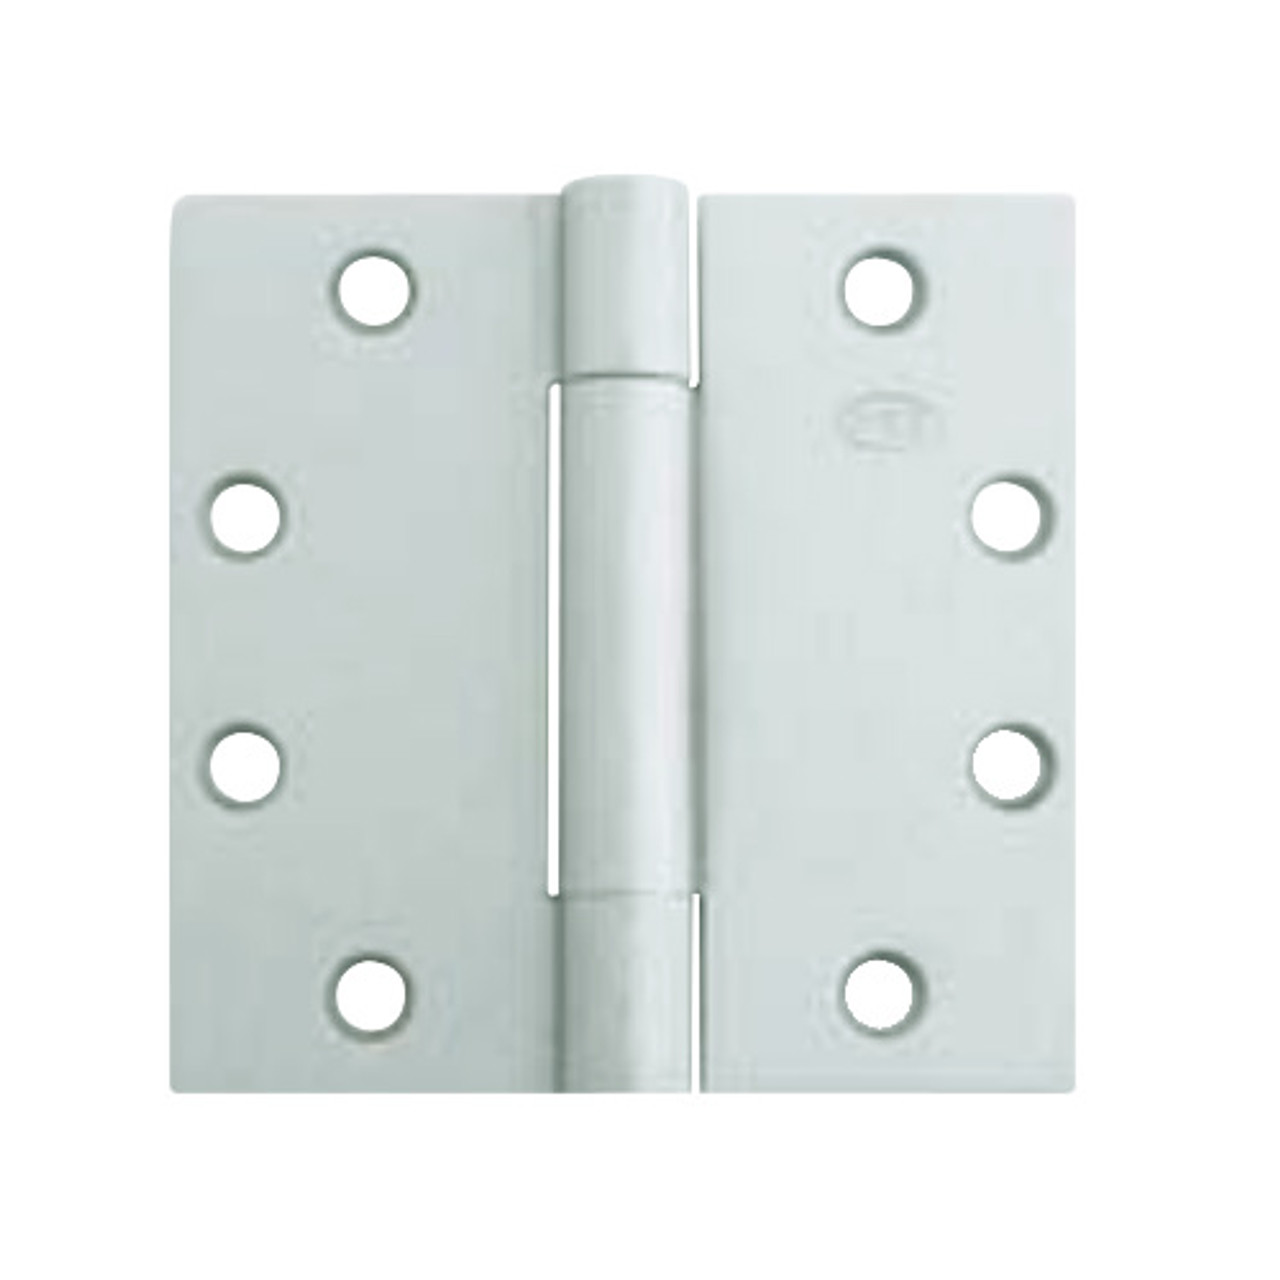 3CB1HW-5x5-646-TW8 IVES 3 Knuckle Concealed Bearing Full Mortise Hinge with Electric Thru-Wire in Satin Nickel Plated